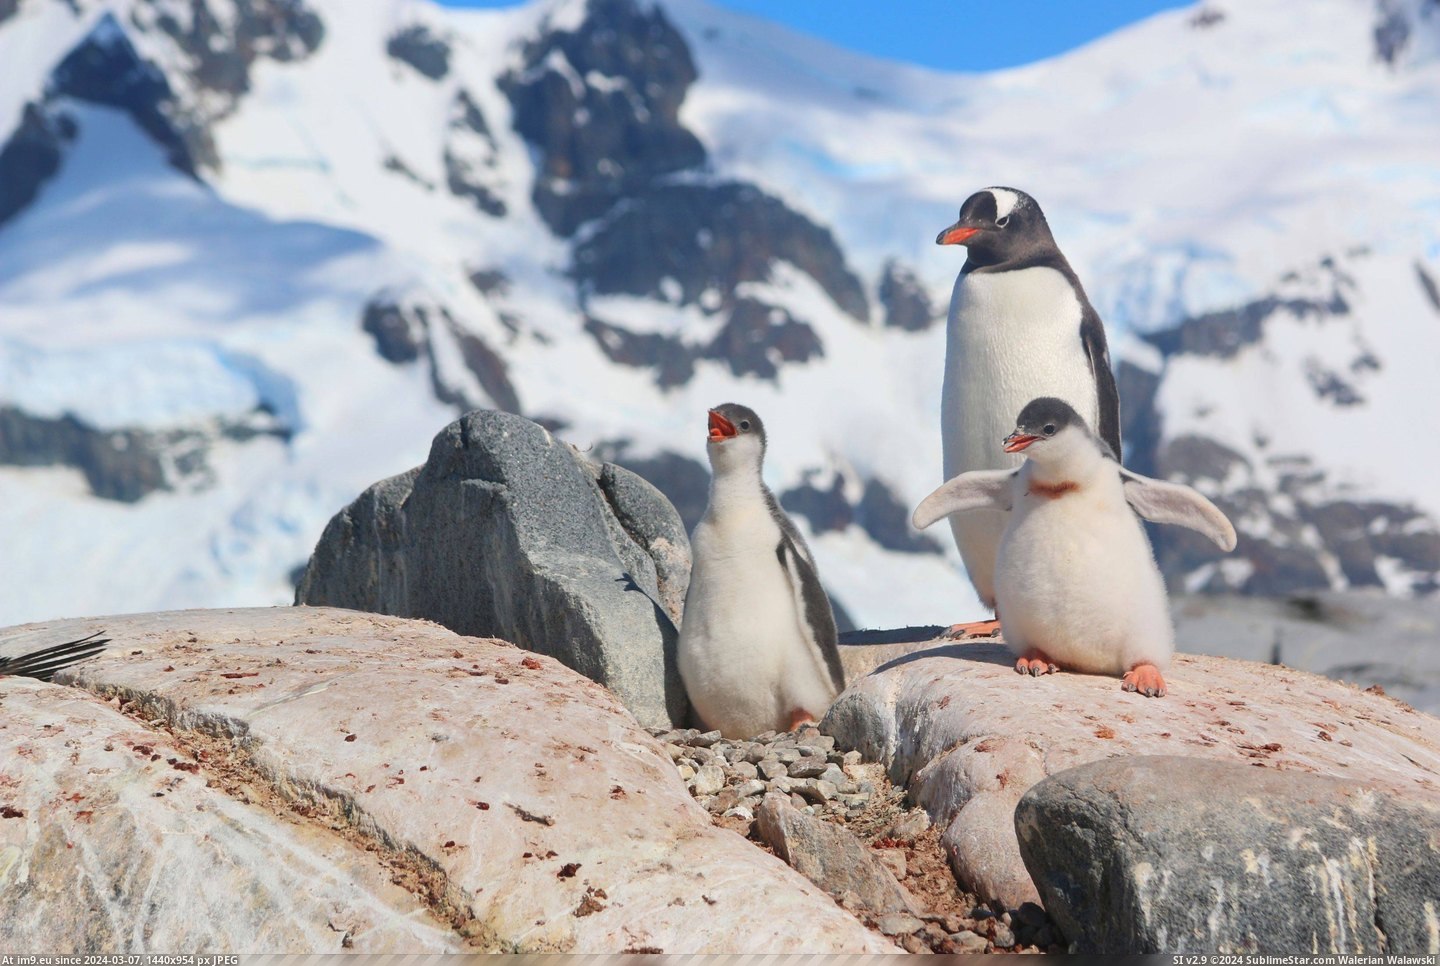 #Wallpaper #Beautiful #Happy #Snow #Highres #Antarctica #Opportunity #Family #Month #Visit #Ran [Aww] Last month I had the opportunity to visit Antarctica, where I ran into this happy family! Pic. (Image of album My r/AWW favs))